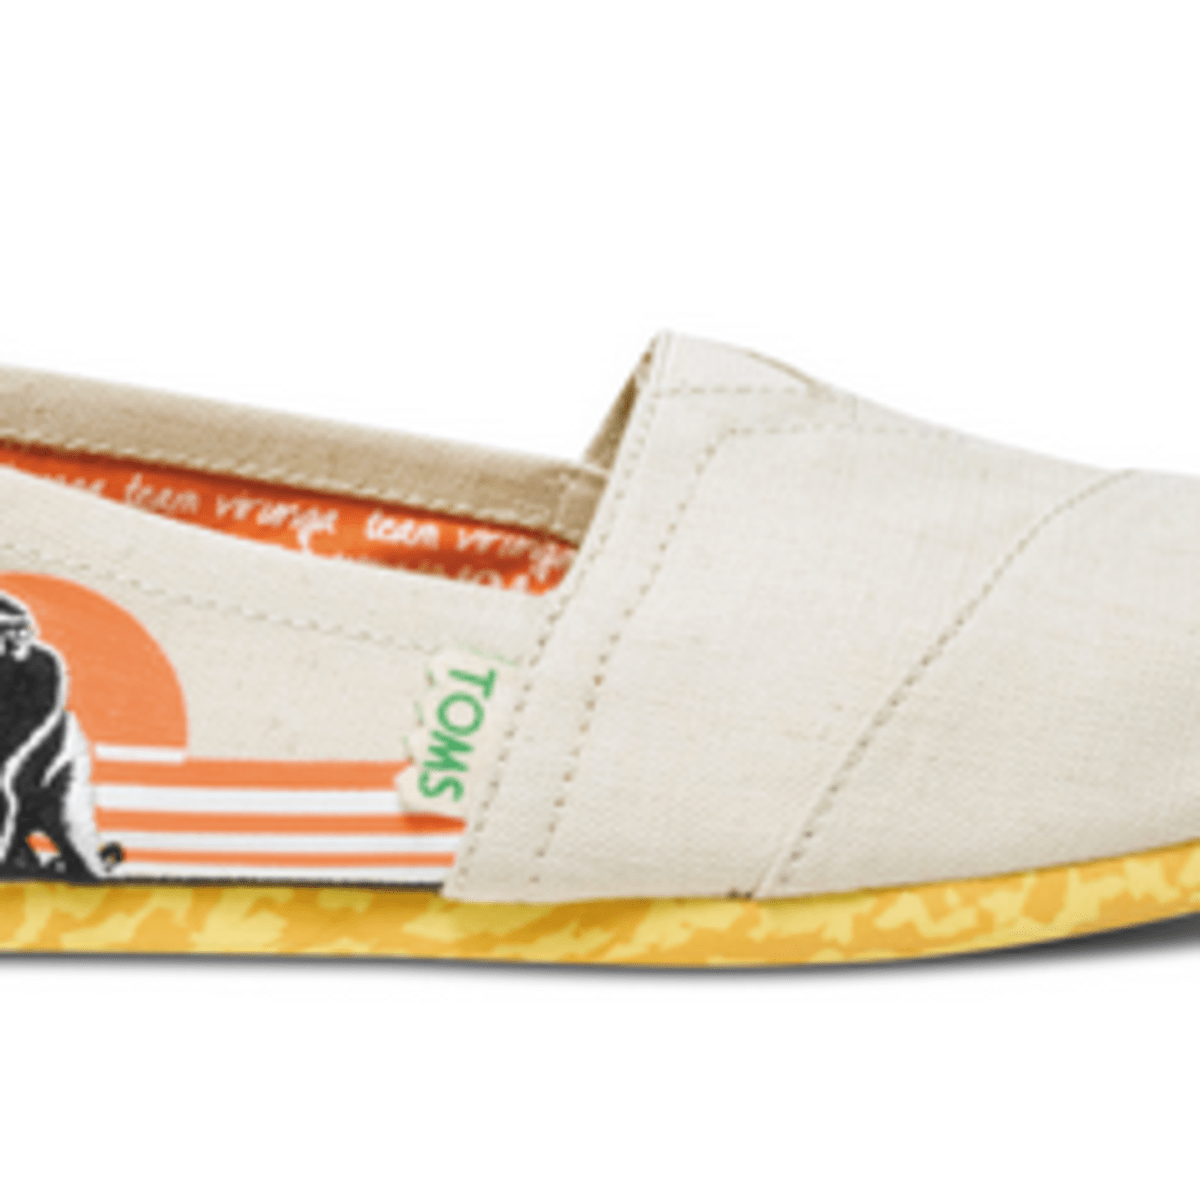 Toms Animal Initiative: Shoes to Save 